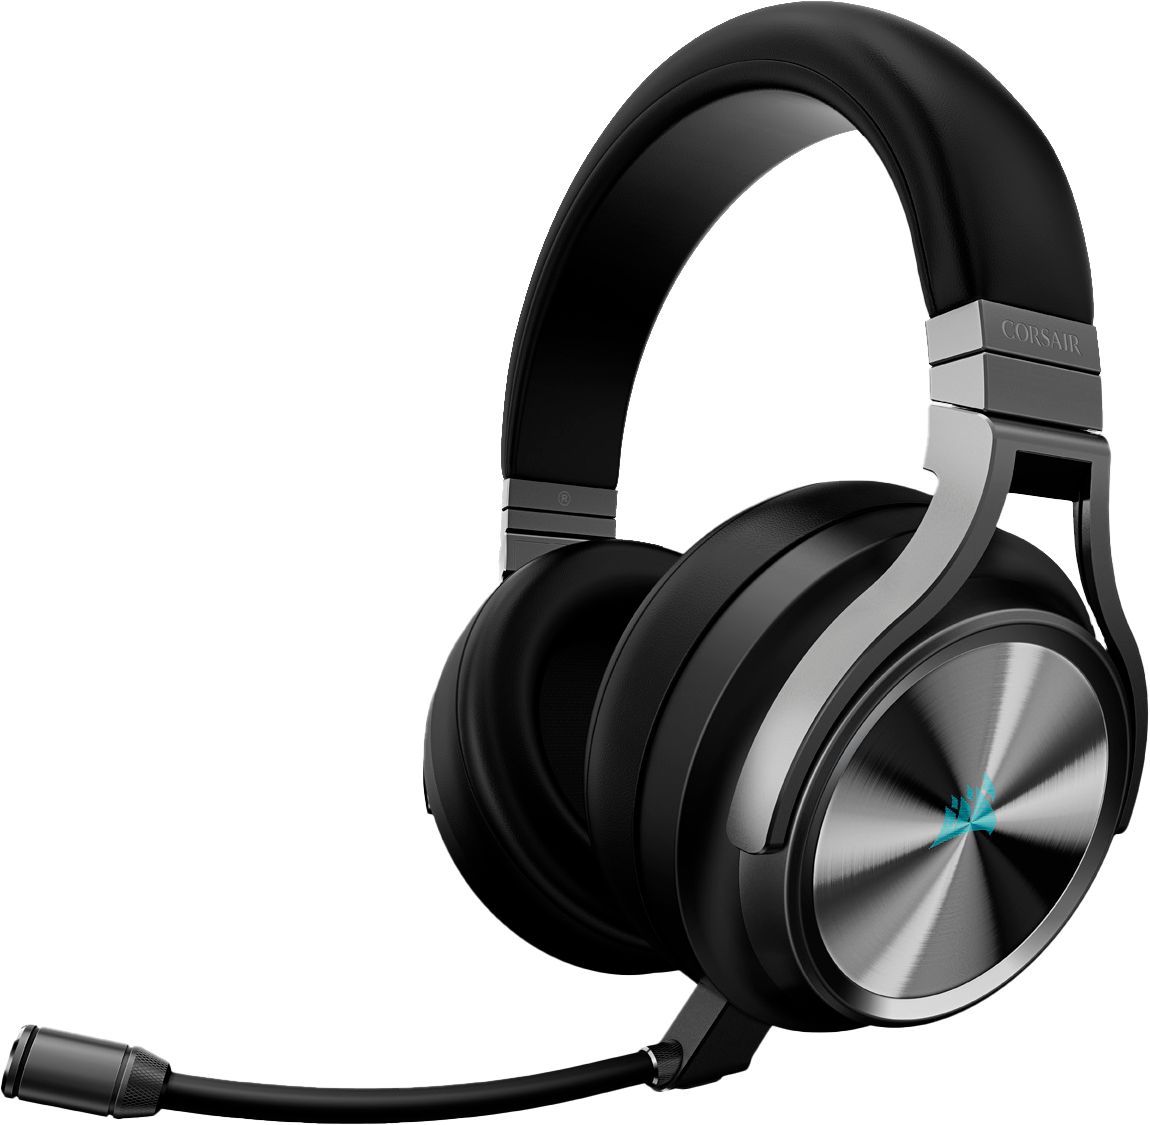 (Refurbished) CORSAIR Virtuoso RGB SE Wireless 7.1 Surround Sound Gaming Over-the-Ear Headset (PC, PS4/PS5, Xbox - wired only) $91